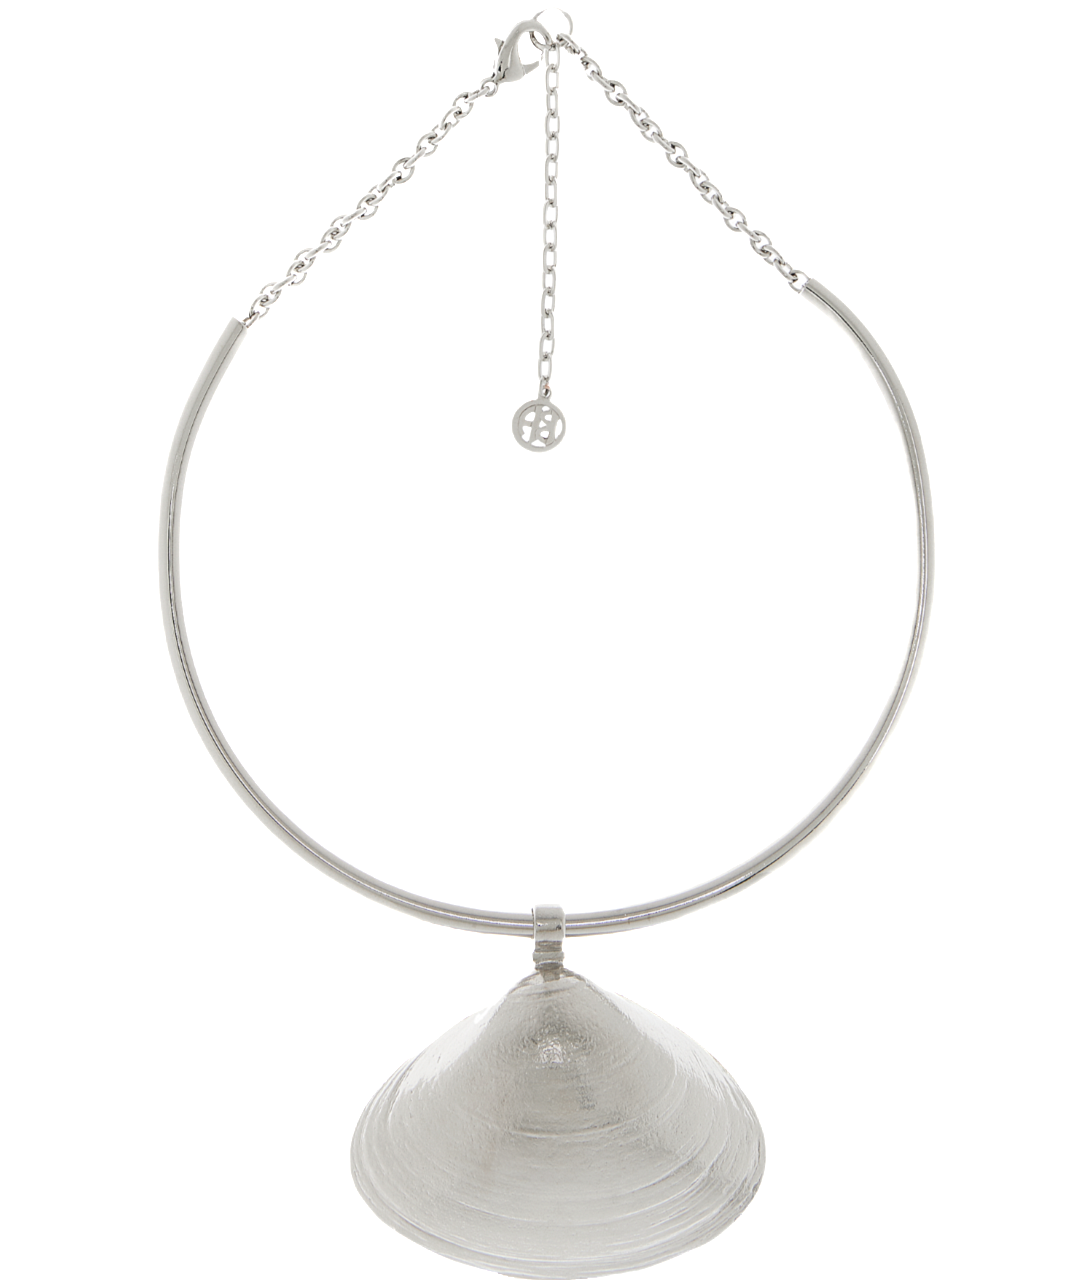 Exclusive Silver-Plated Shell Pendant Necklace